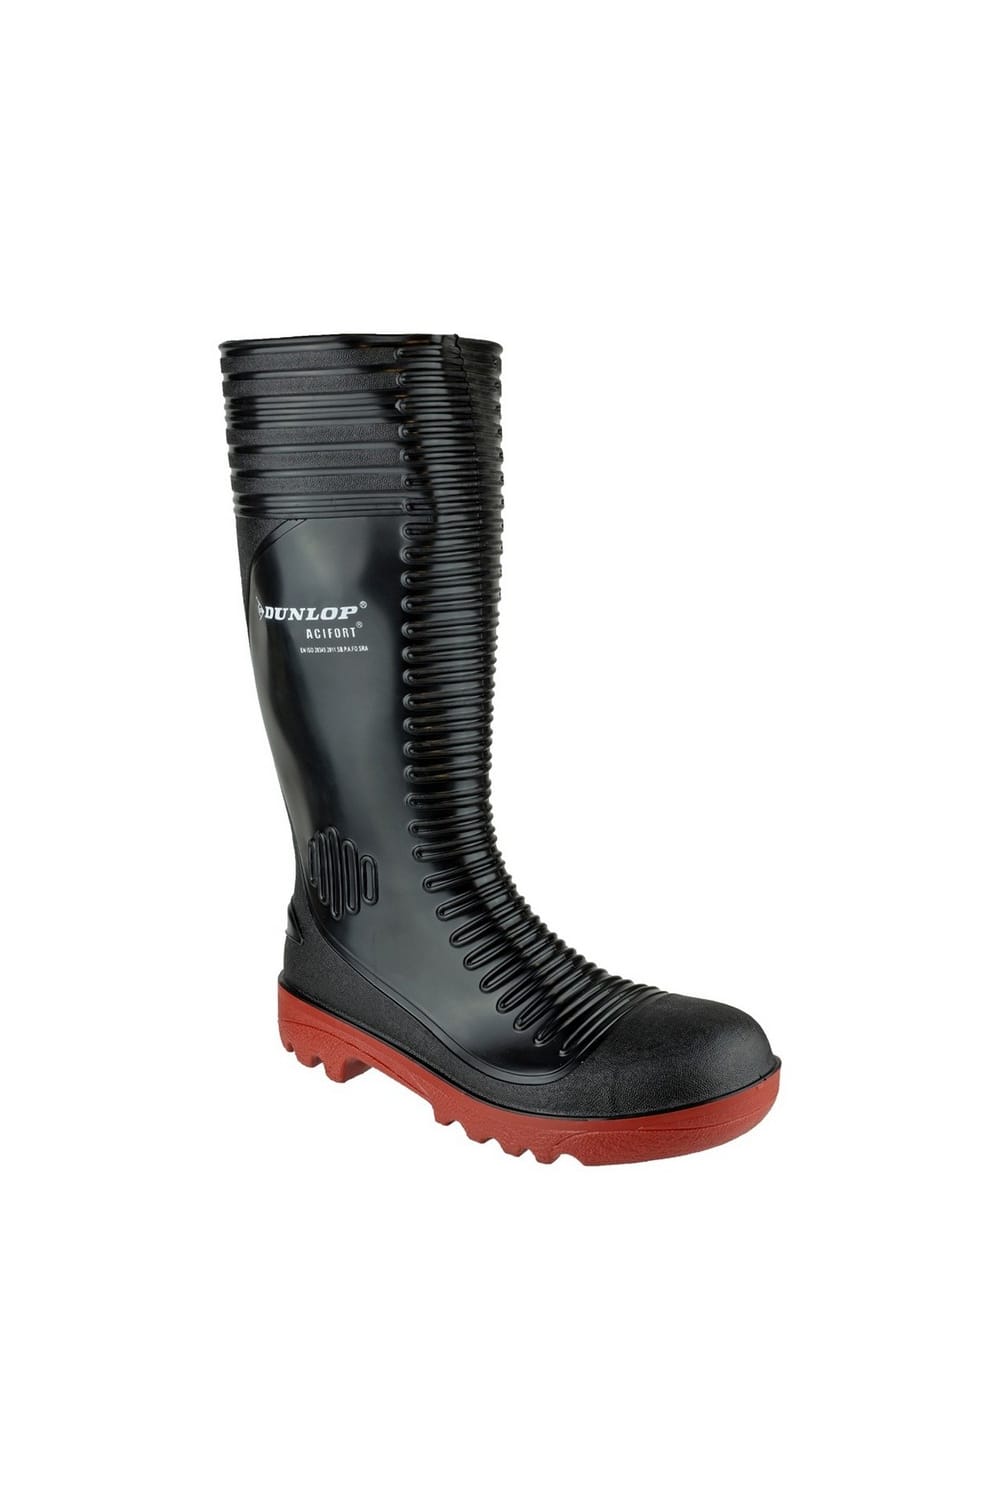 Mens Acifort Ribbed Full Safety Wellies - Black